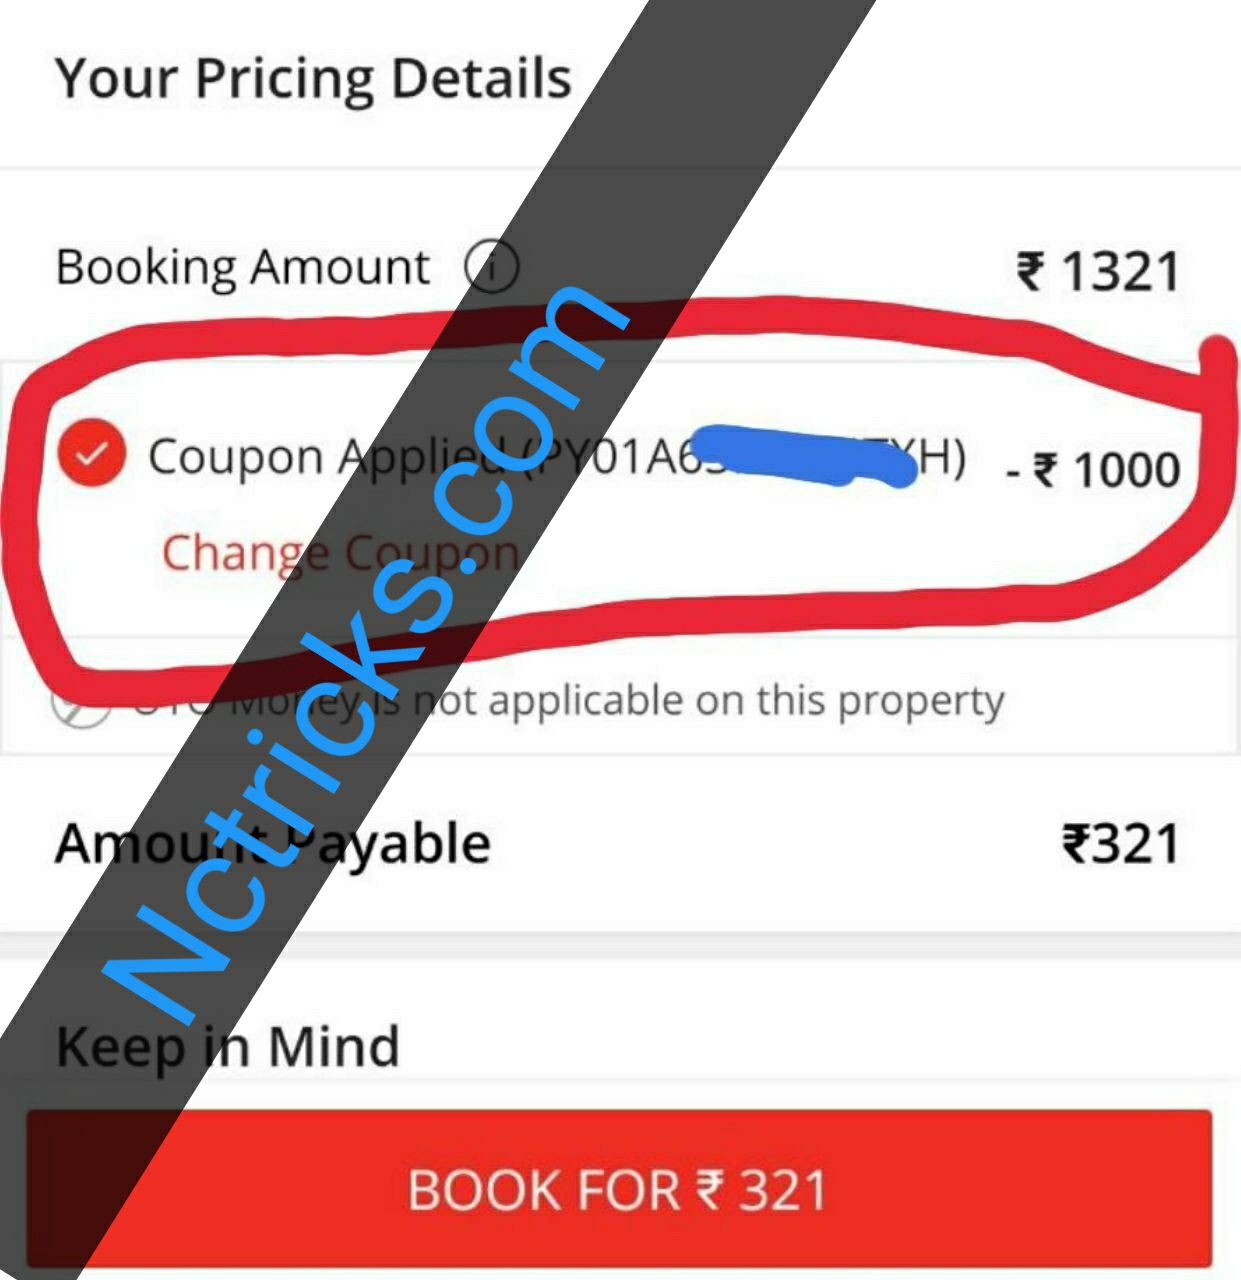 (Loot) OYO - Flat Rs.1000 off on Hotel booking (Free OYO Booking Offer)